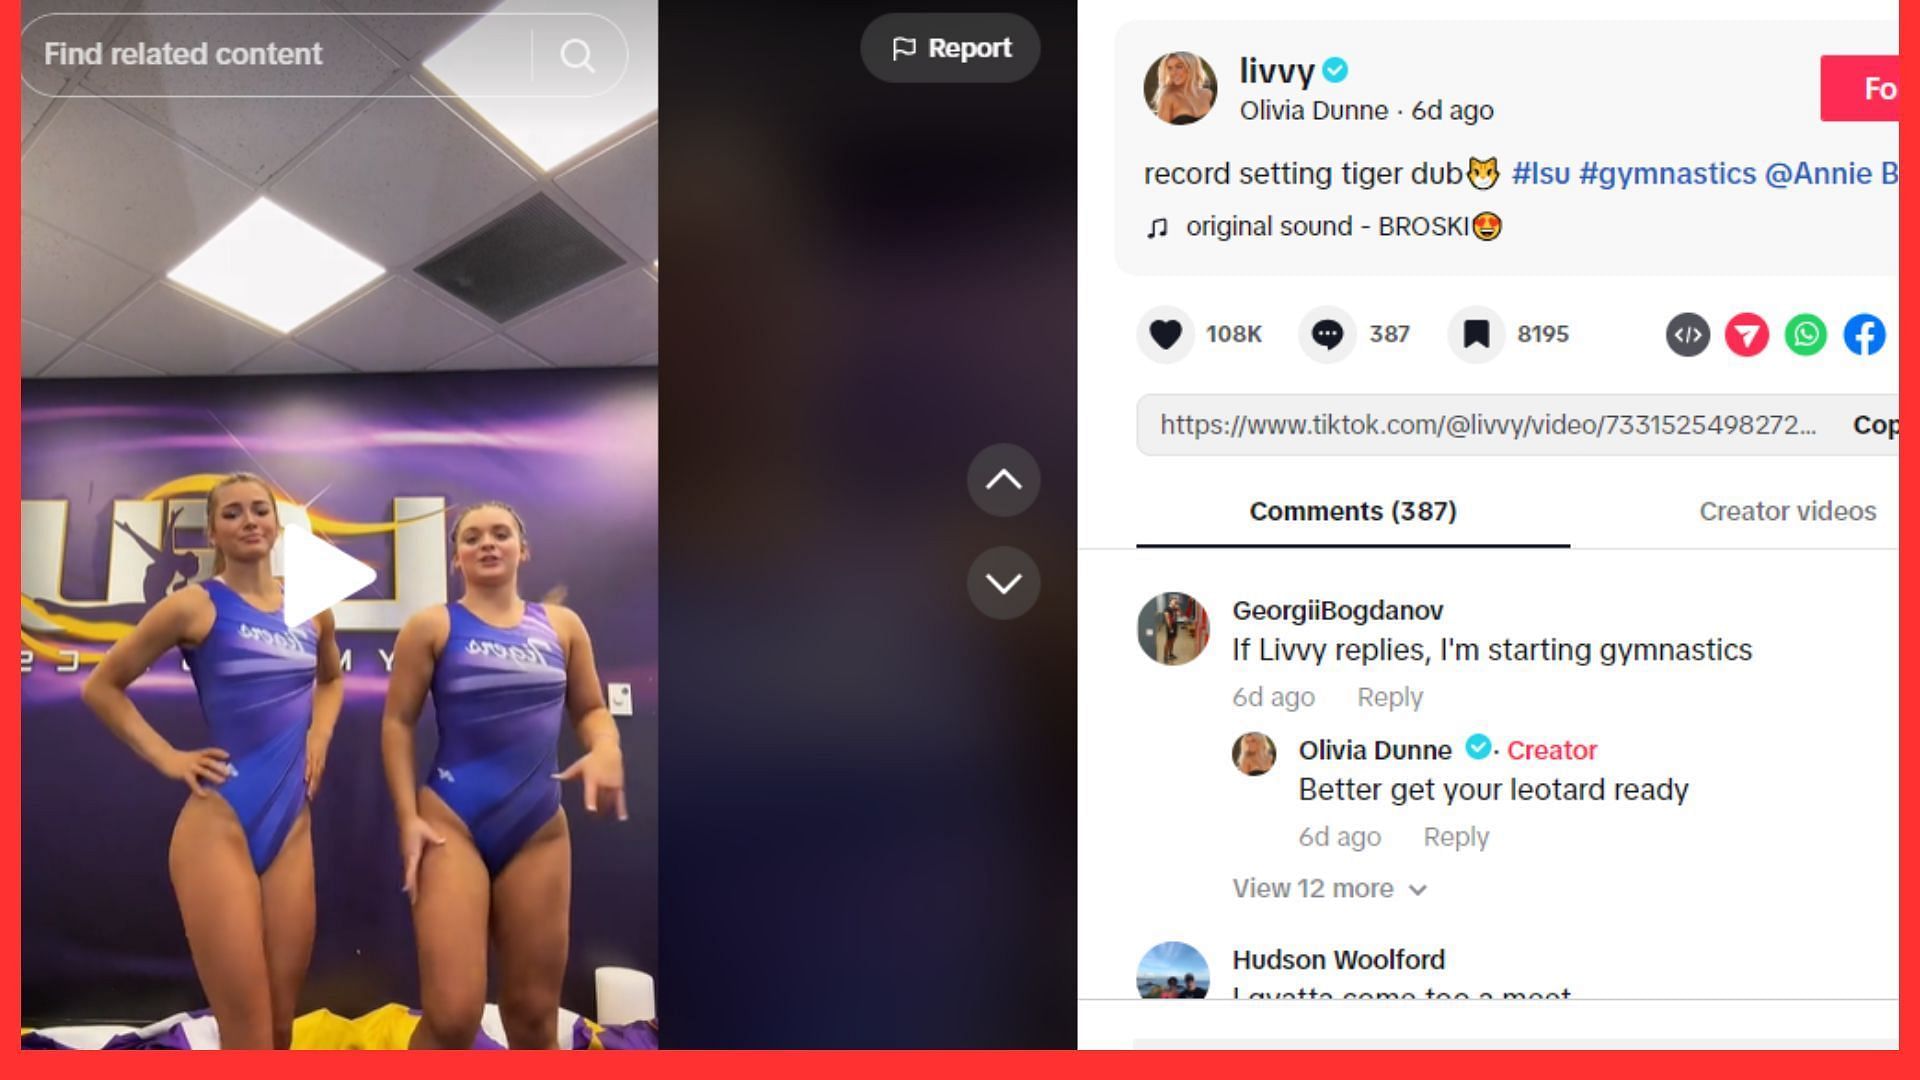 Fan claims she will start gymnastics if Dunne replied to her comment